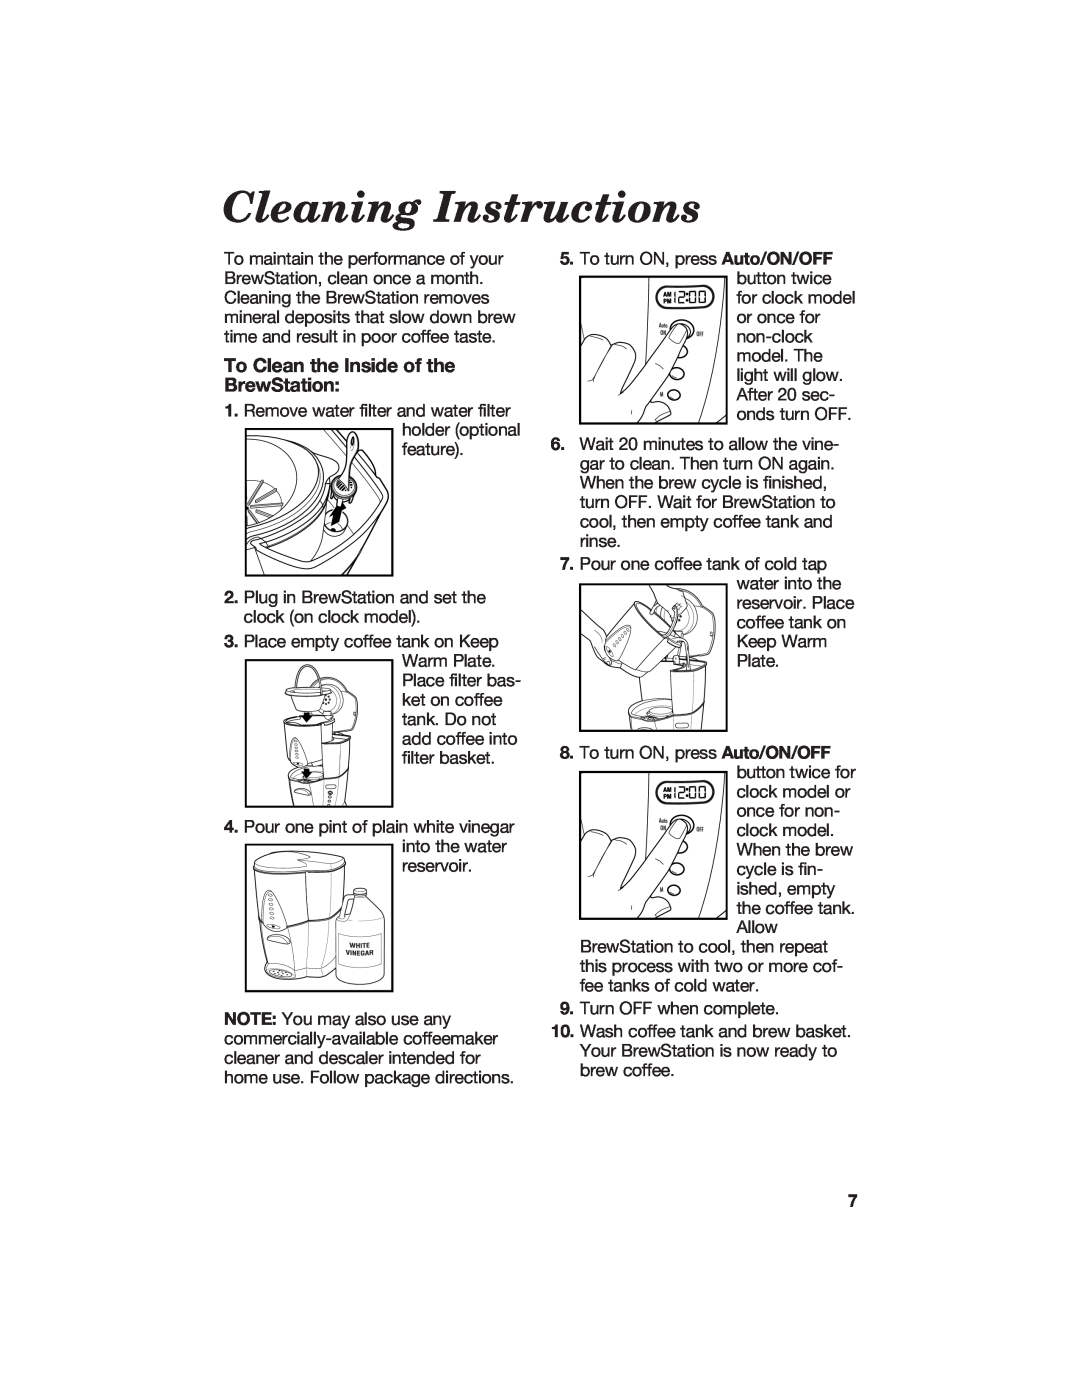 Hamilton Beach manual Cleaning Instructions, To Clean the Inside of the BrewStation 